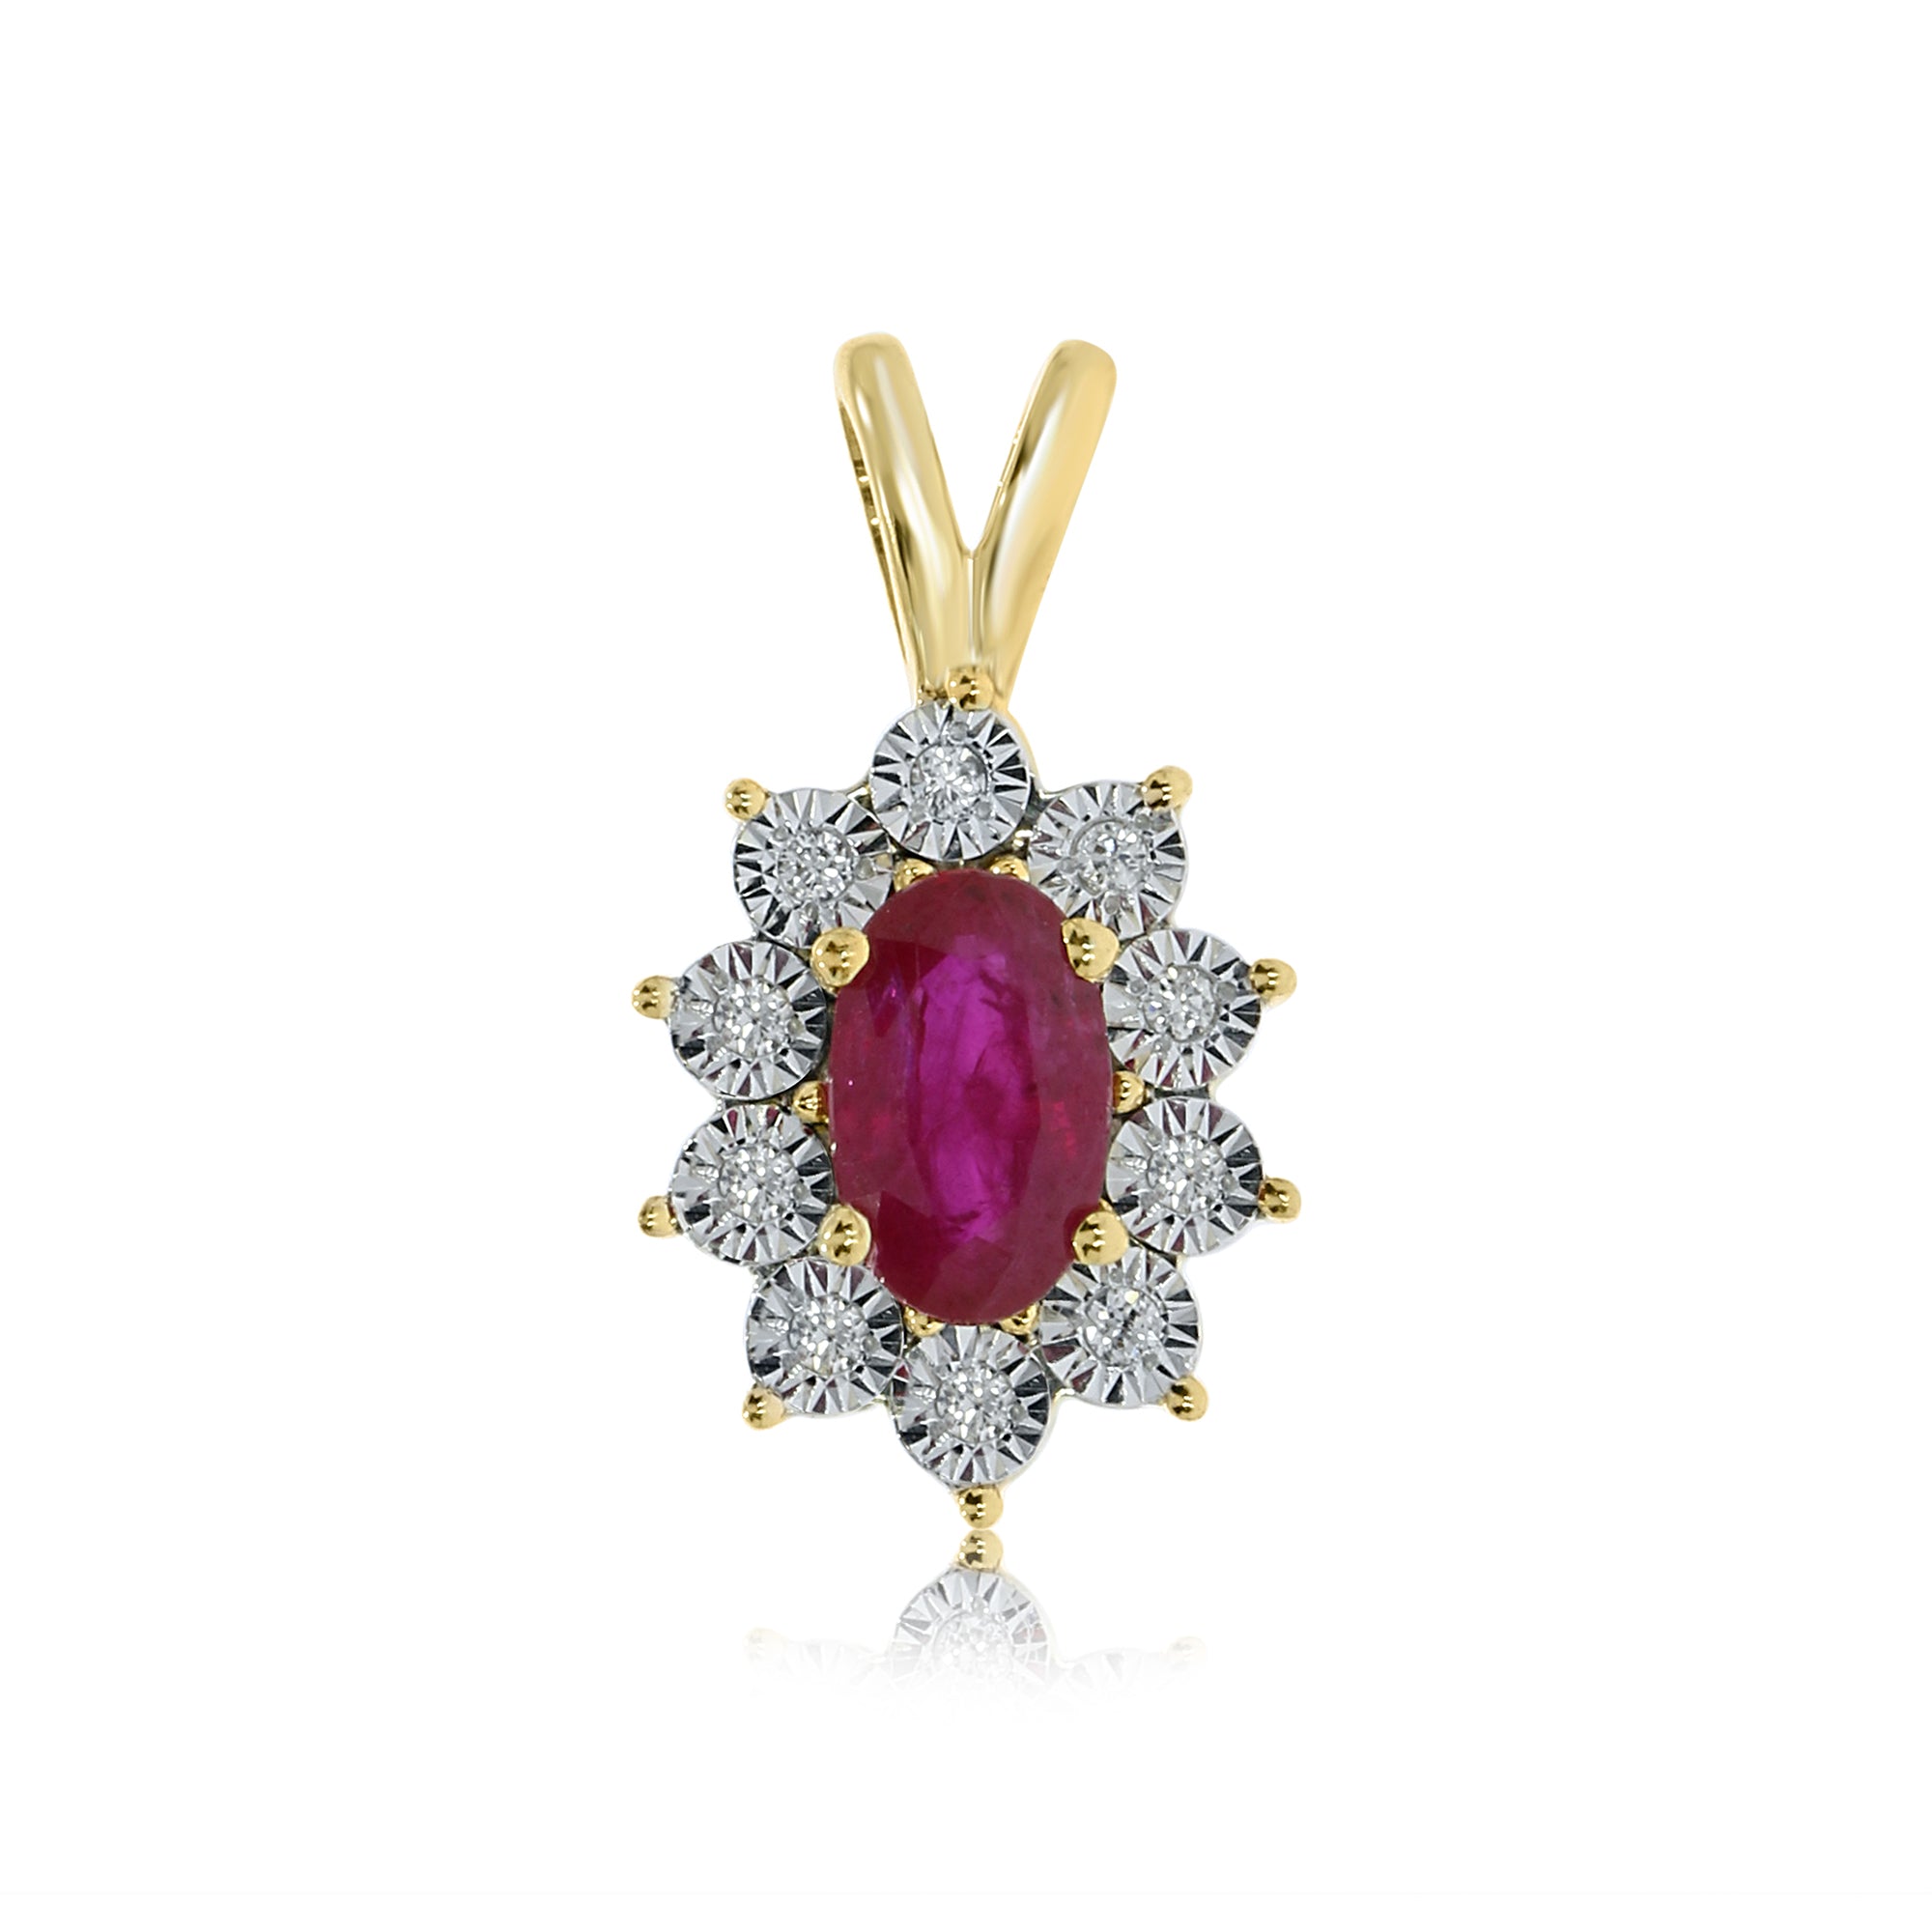 9ct gold 5x3mm oval ruby & miracle plate diamond cluster pendant 0.03ct